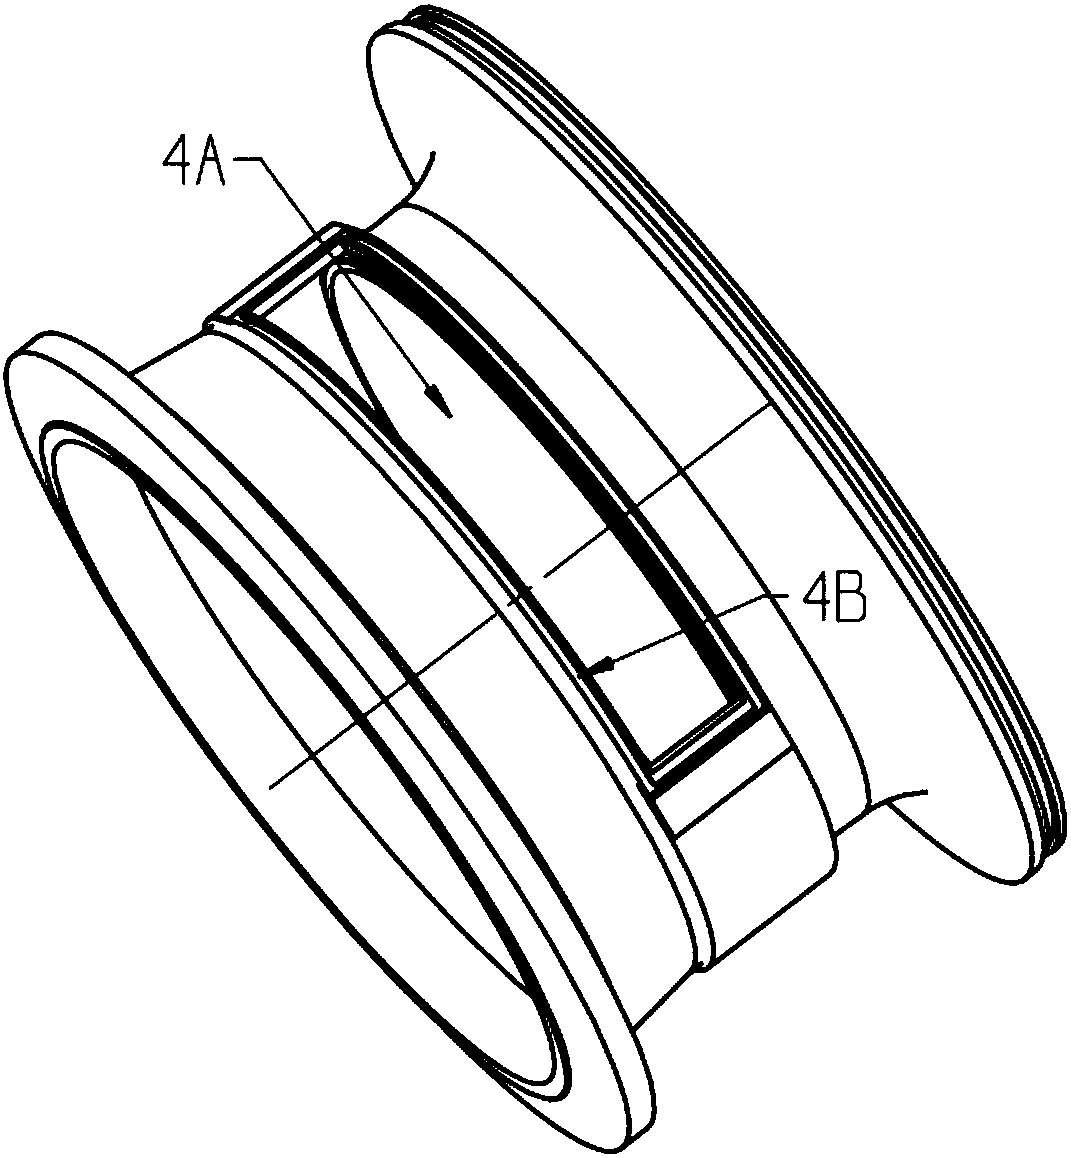 An Axial Flow-Centrifugal Integral Blisk Type Combined Compression System